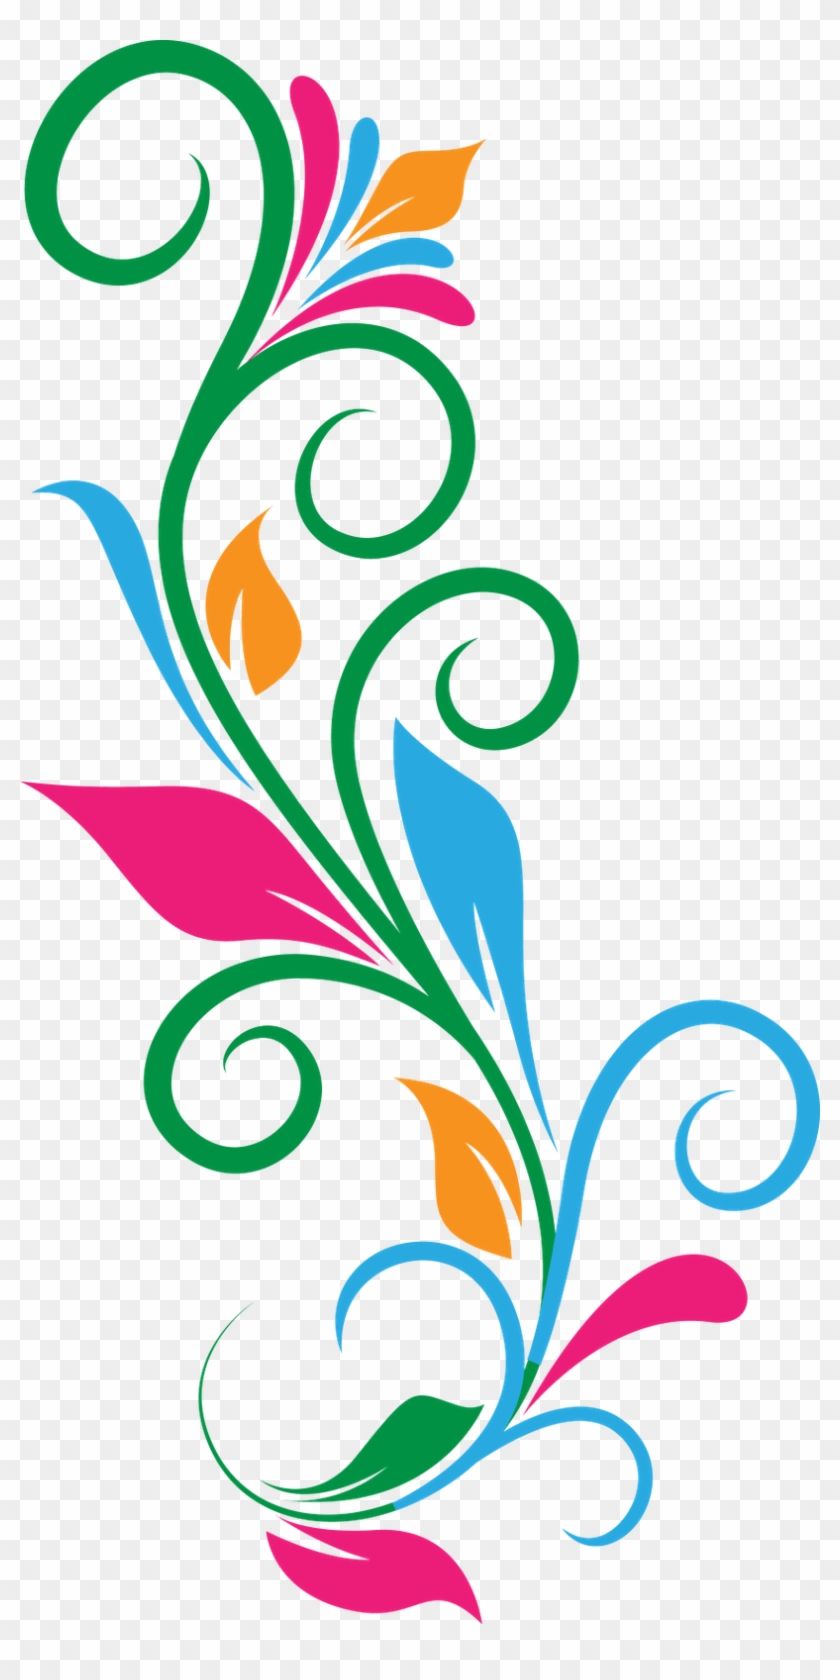 Clip Arts Related To - Colorful Floral Designs Png #66333